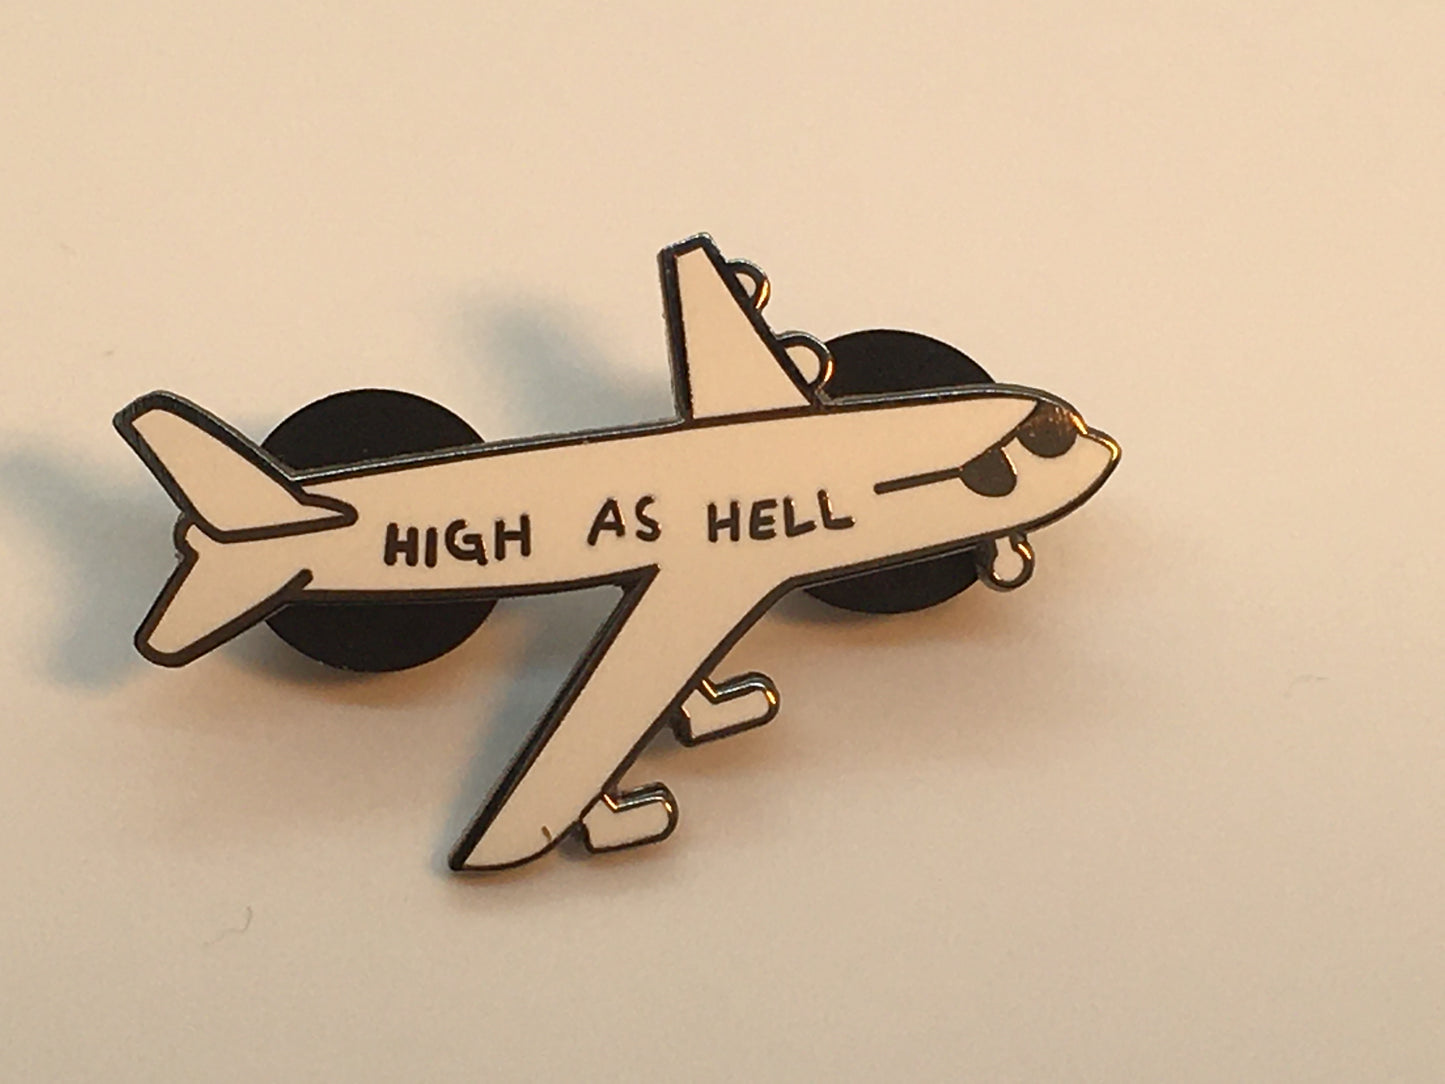 High as Hell Plane Pin